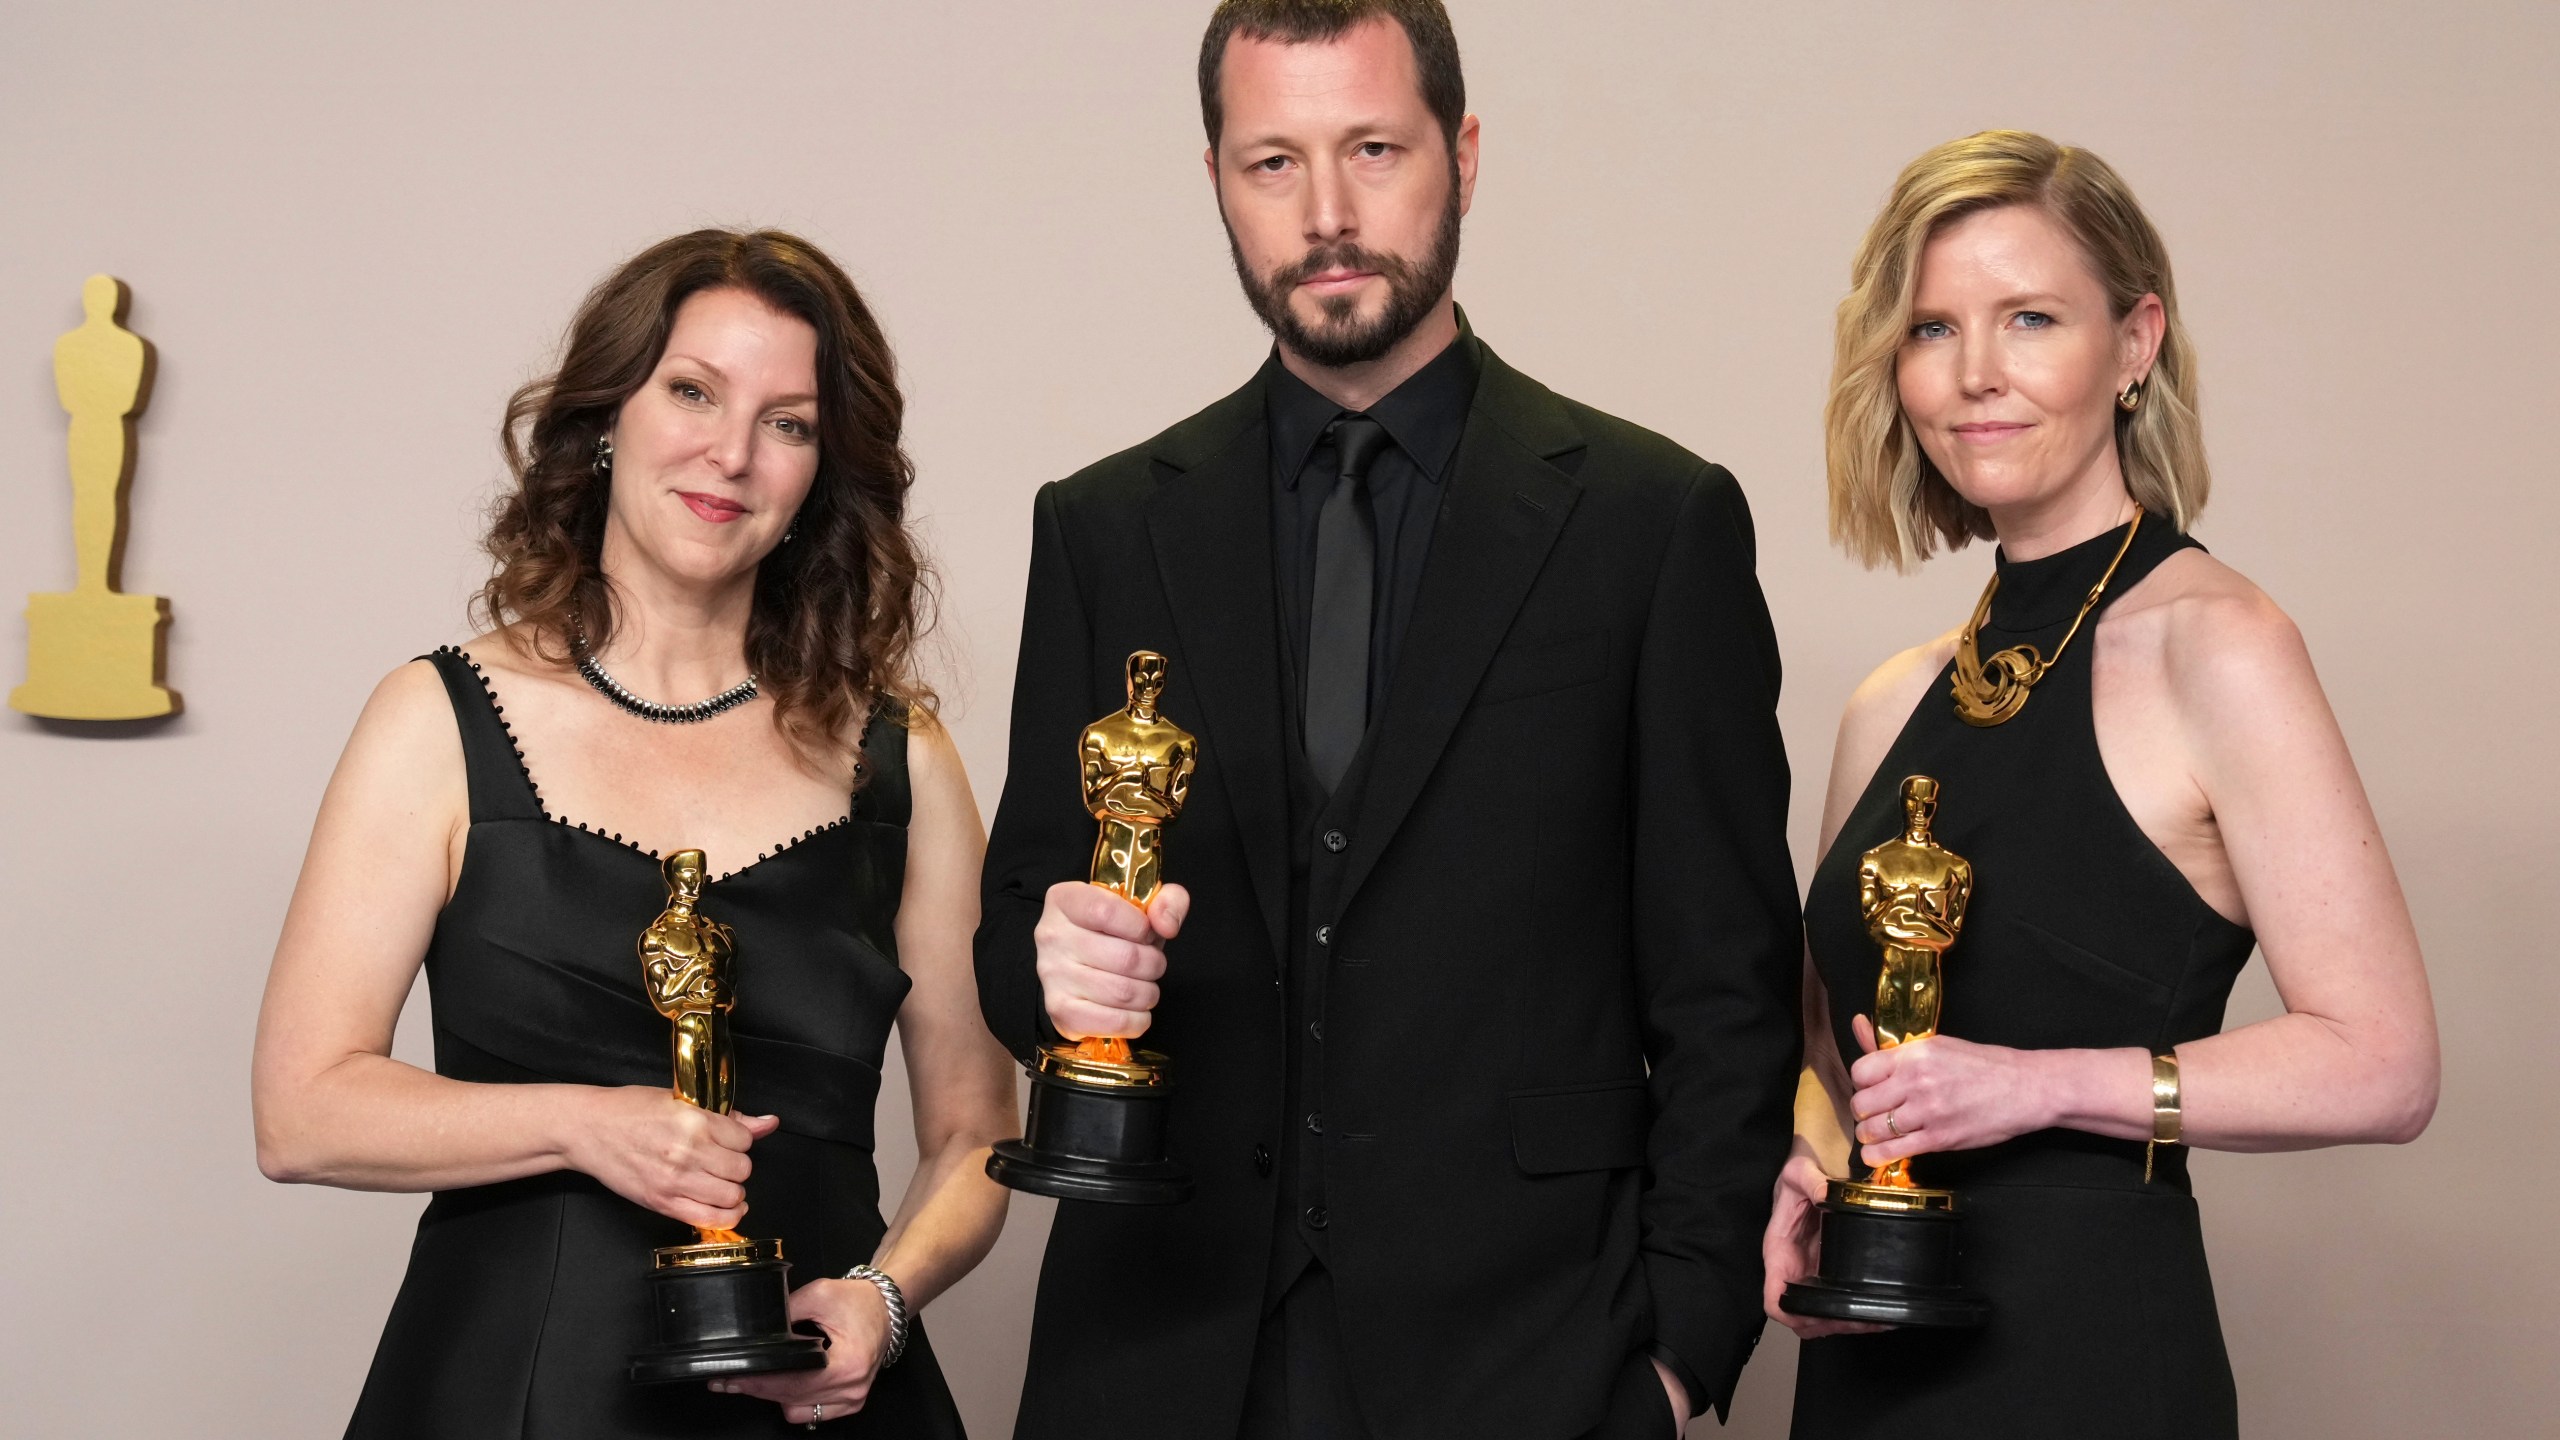 Raney Aronson-Rath, from left, Mstyslav Chernov, and Michelle Mizner pose in the press room with the award for best documentary feature film for "20 Days in Mariupol" at the Oscars on Sunday, March 10, 2024, at the Dolby Theatre in Los Angeles. (Photo by Jordan Strauss/Invision/AP)